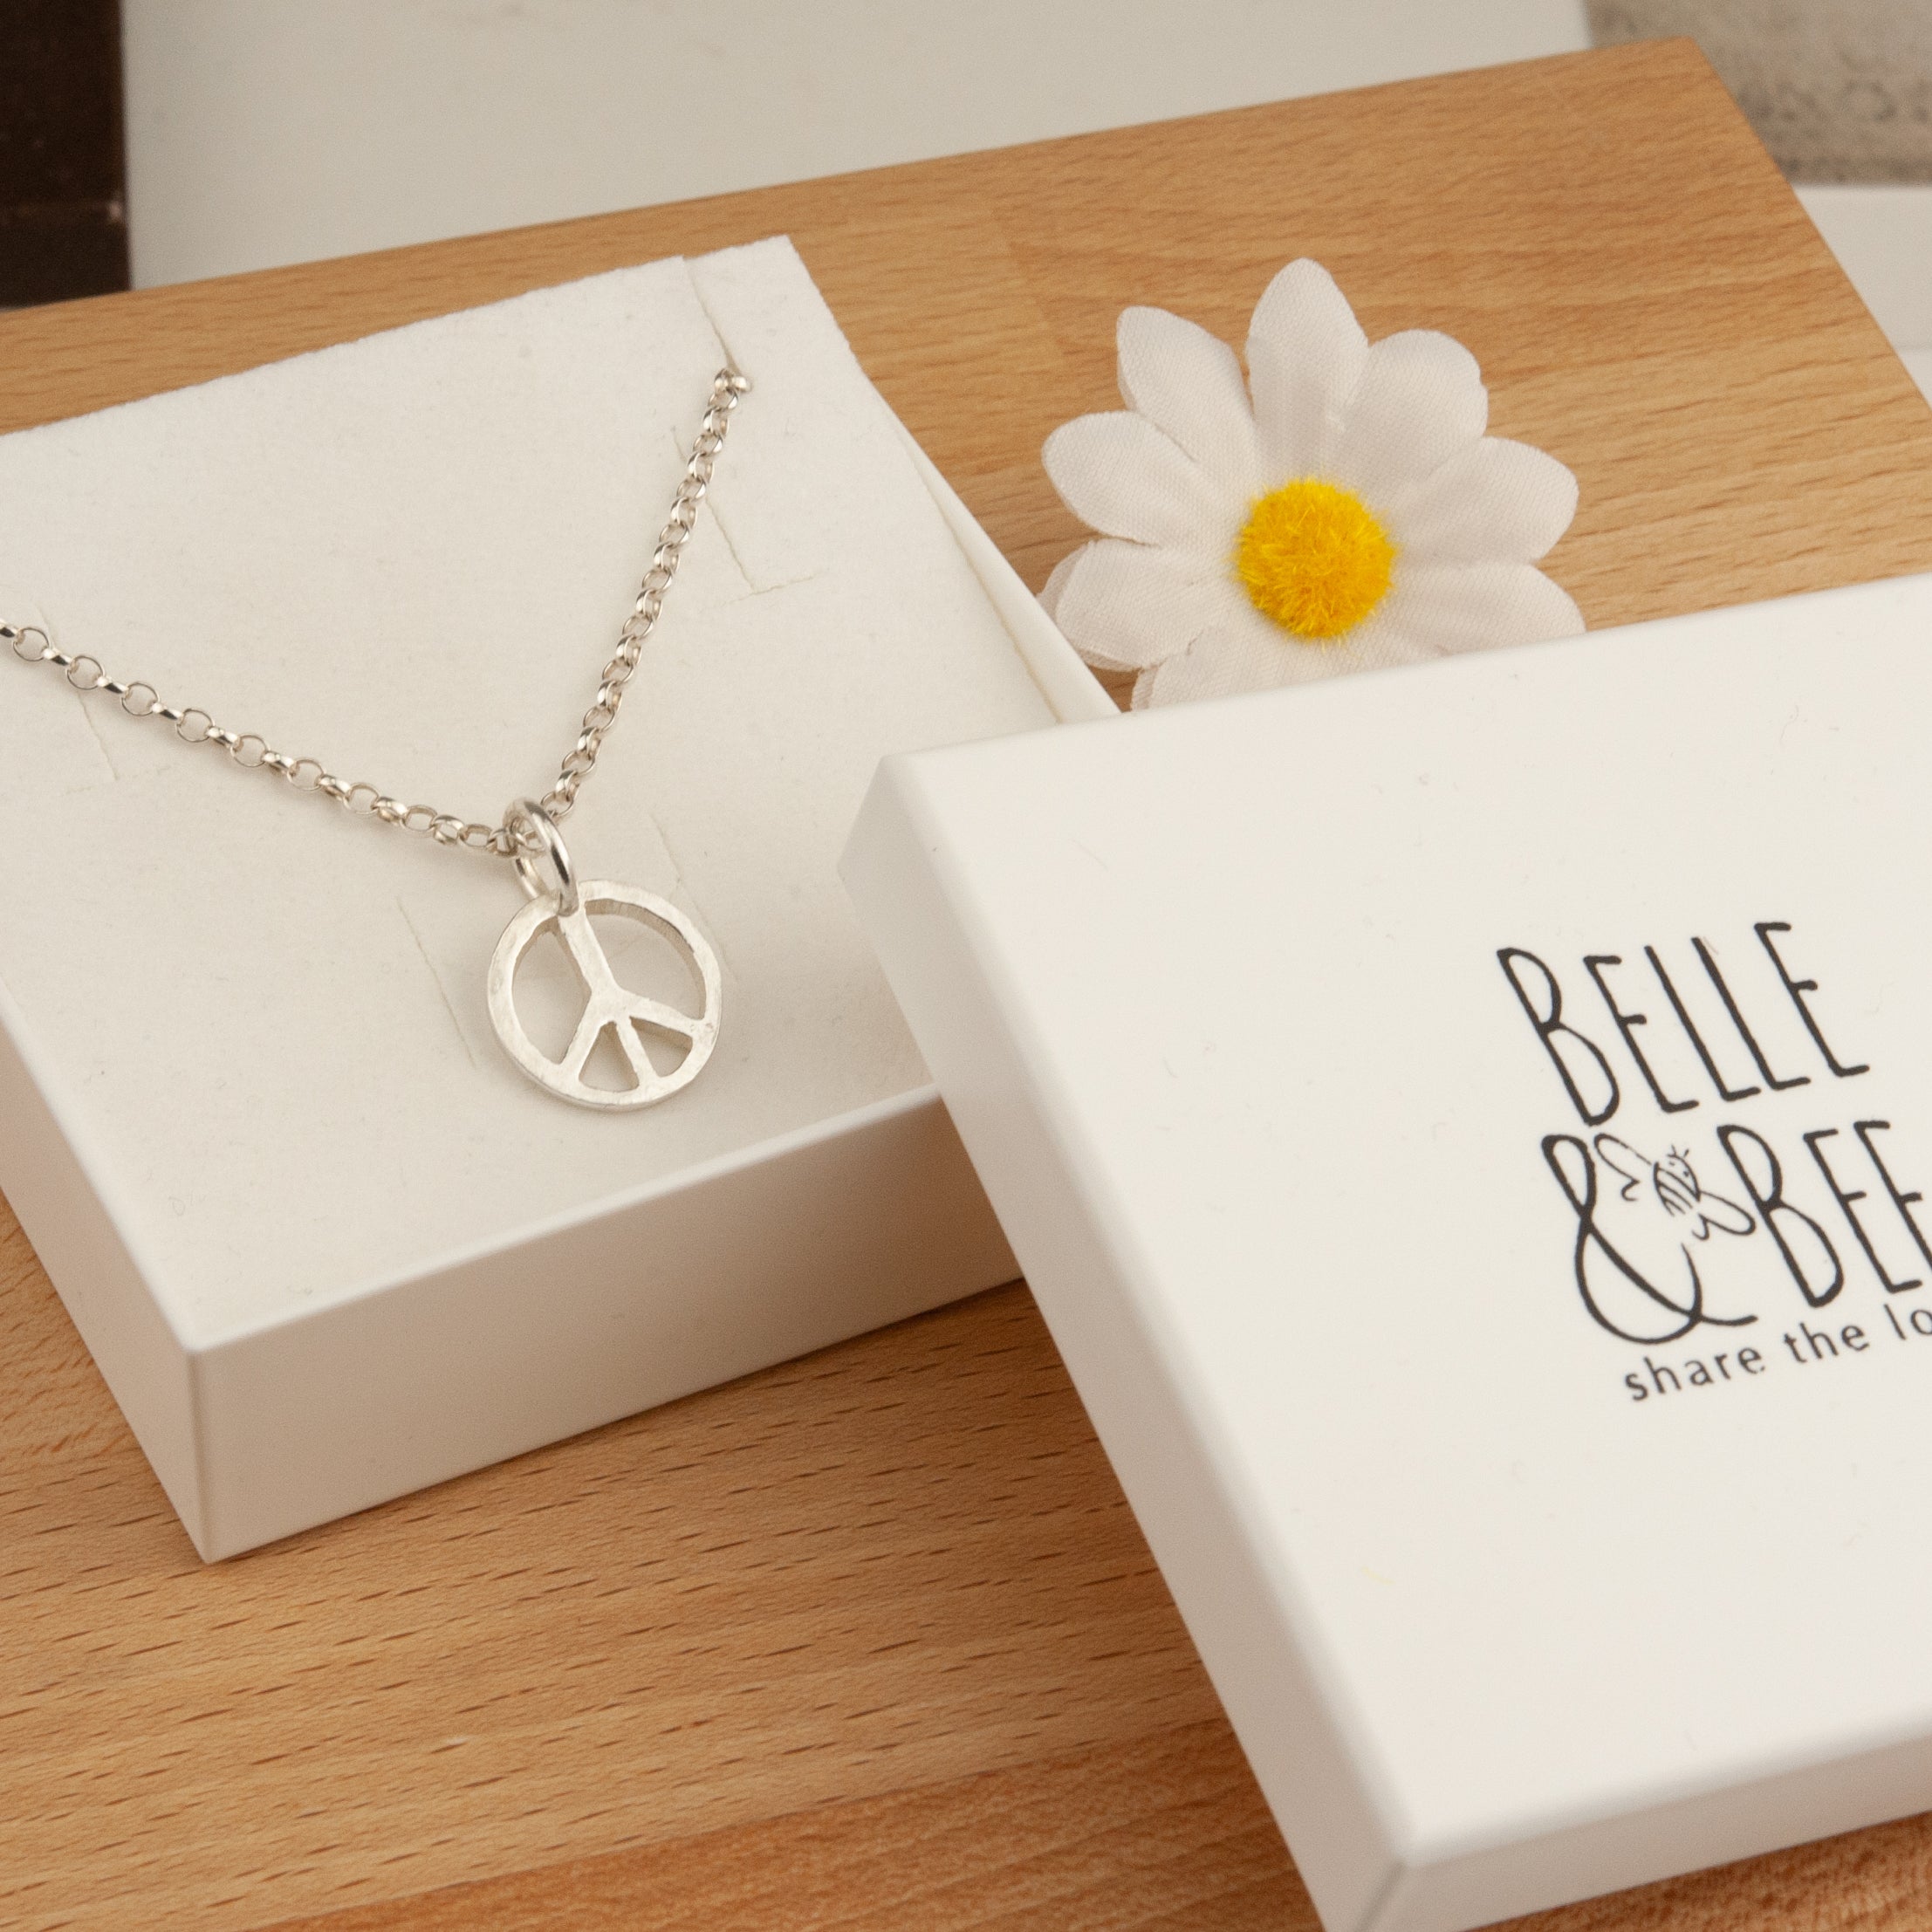 Belle & Bee sterling silver peace sign necklace